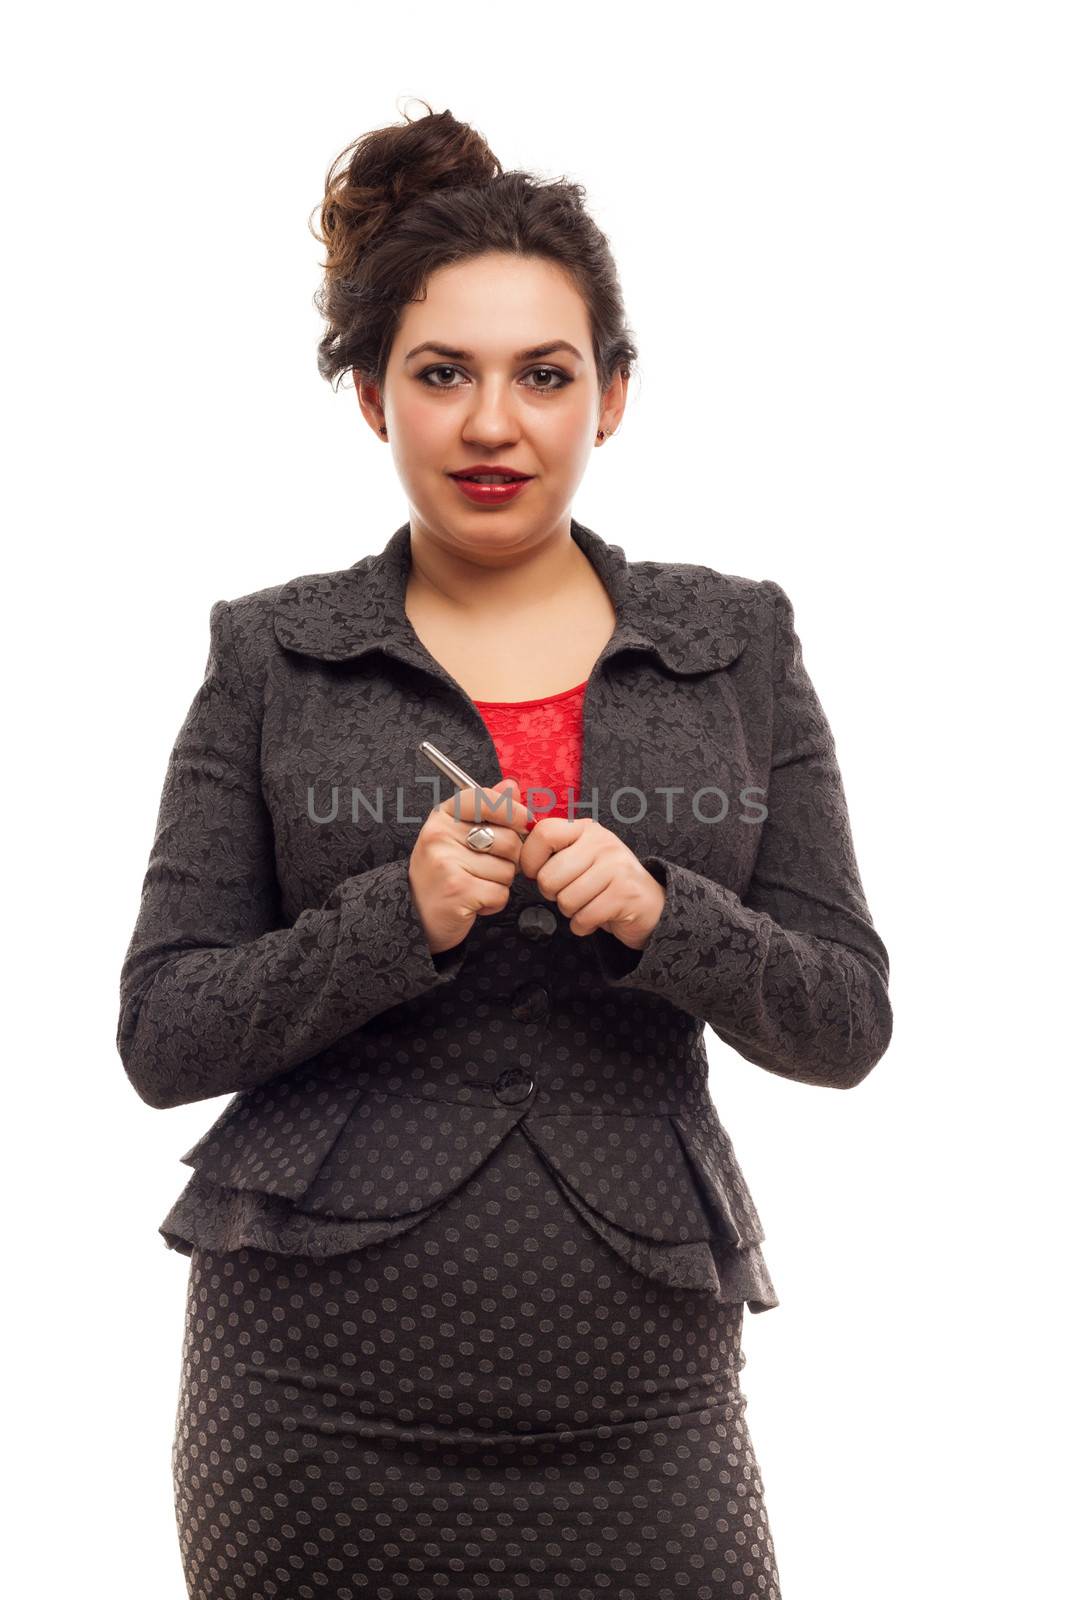 Confident business woman portrait with pen isolated over a white background